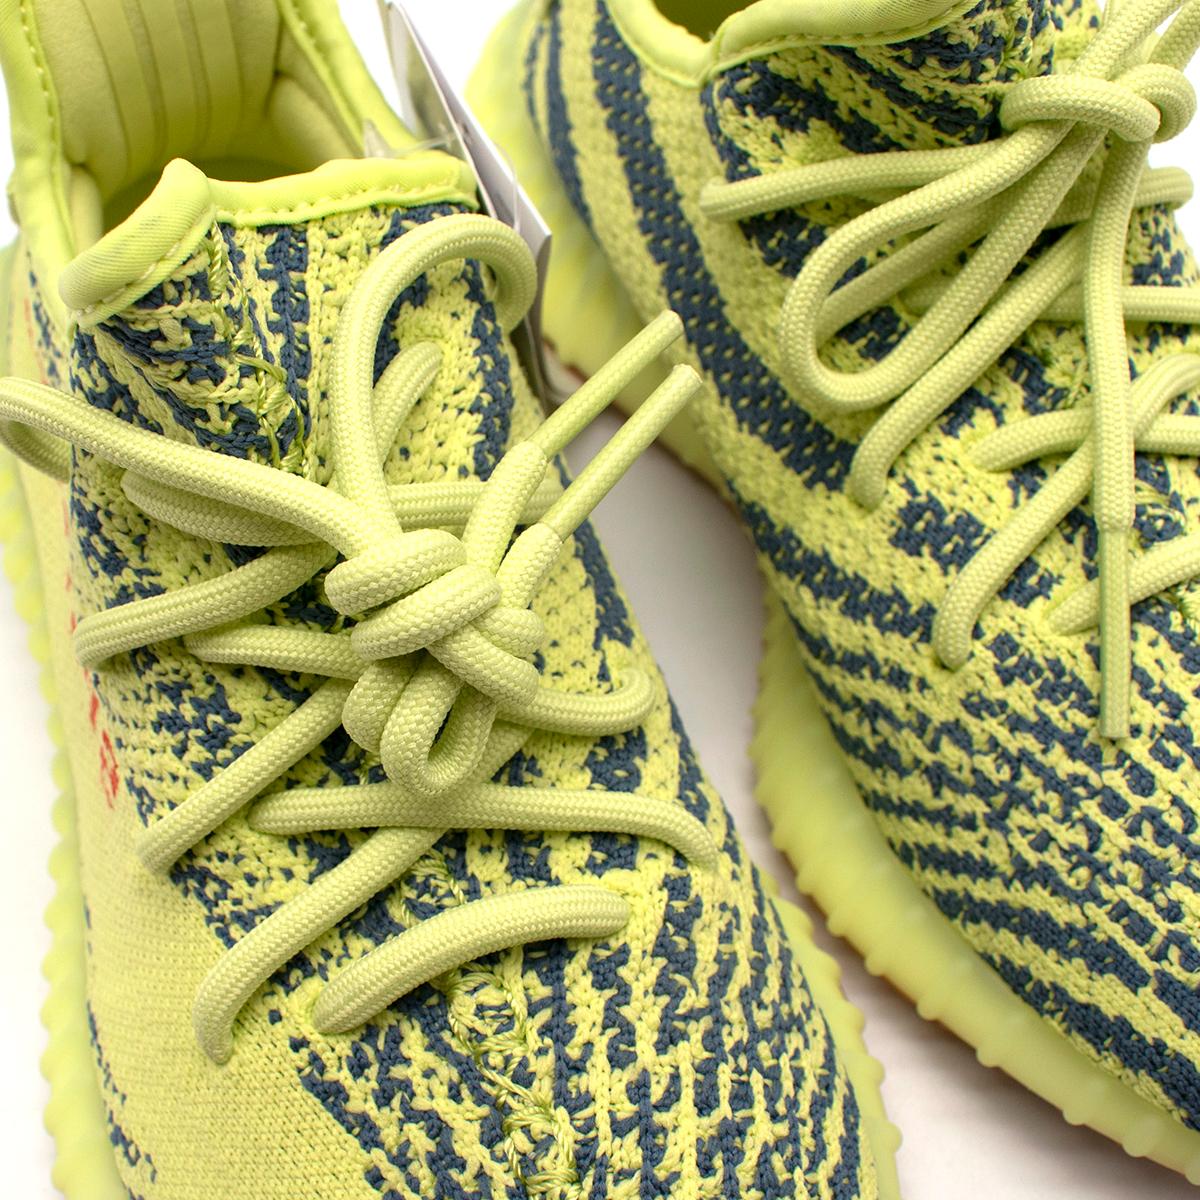 Women's Yeezy Neon Yellow Boost 350 V2 Trainers - Us 6.5 For Sale